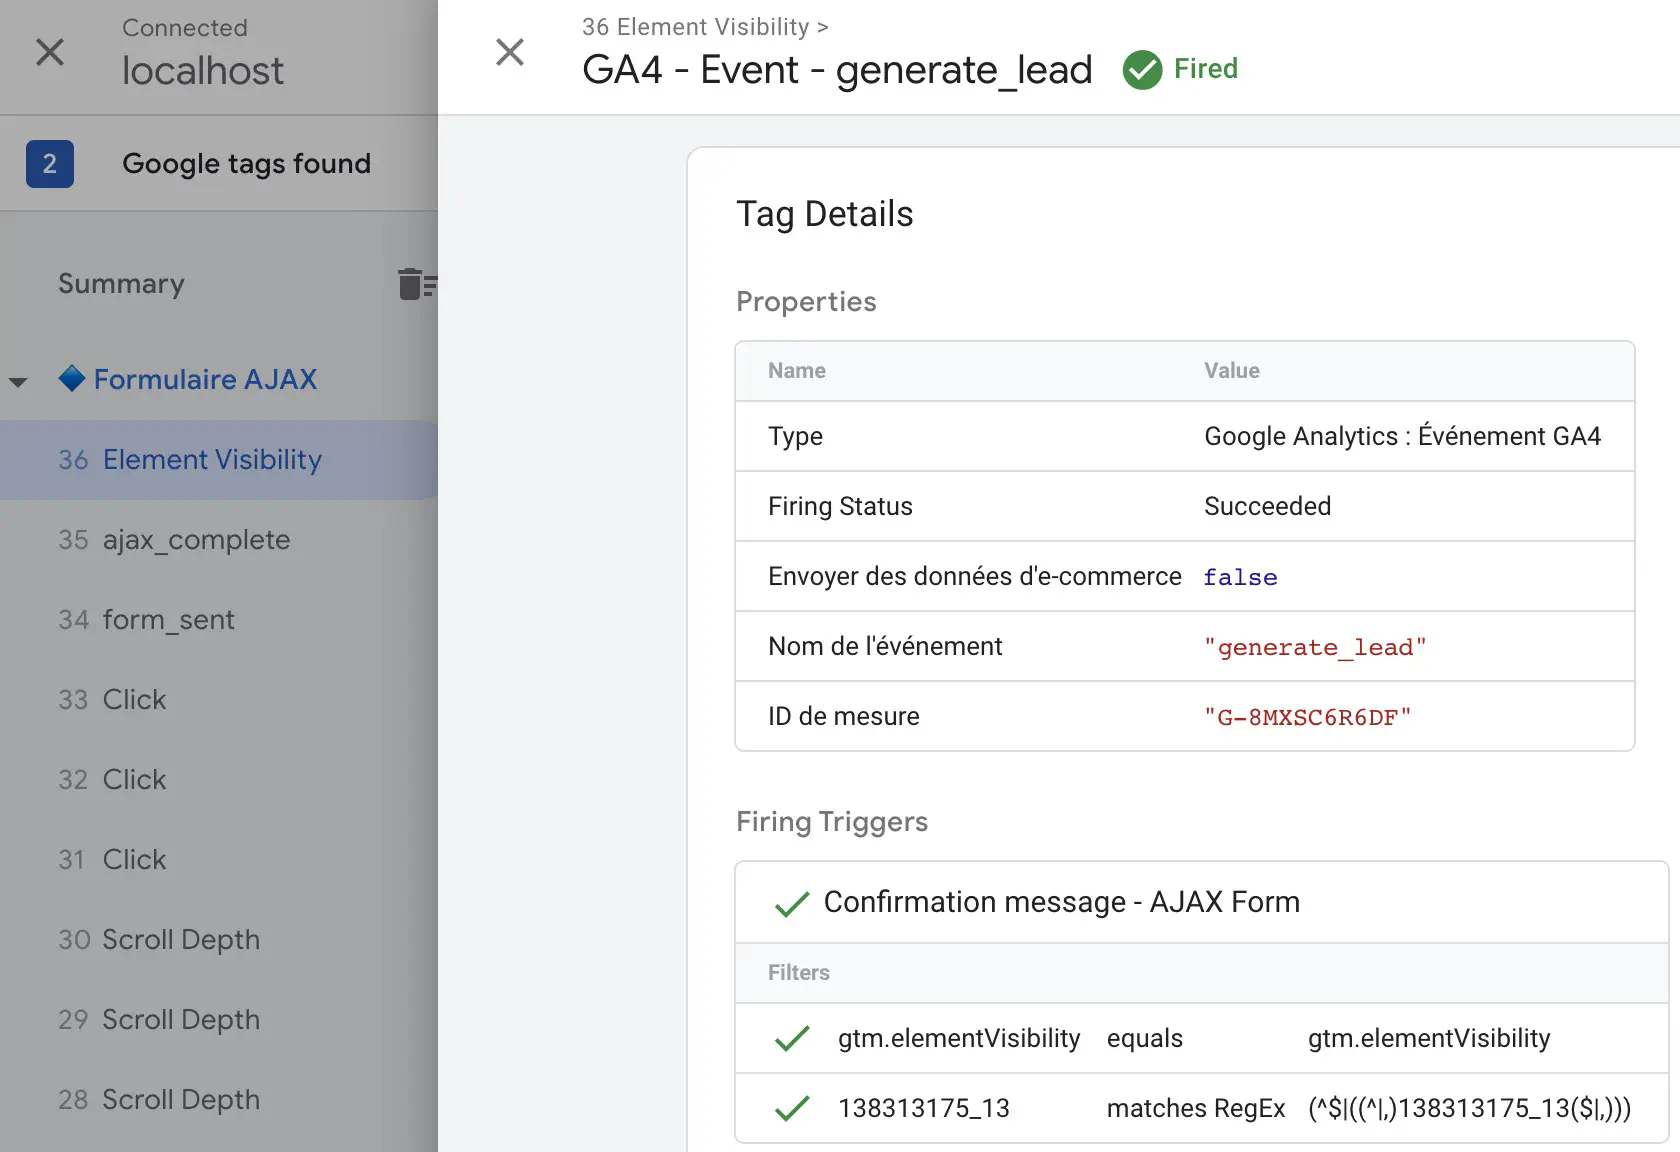 Debug GA4 event tag trigger when the confirmation message appears